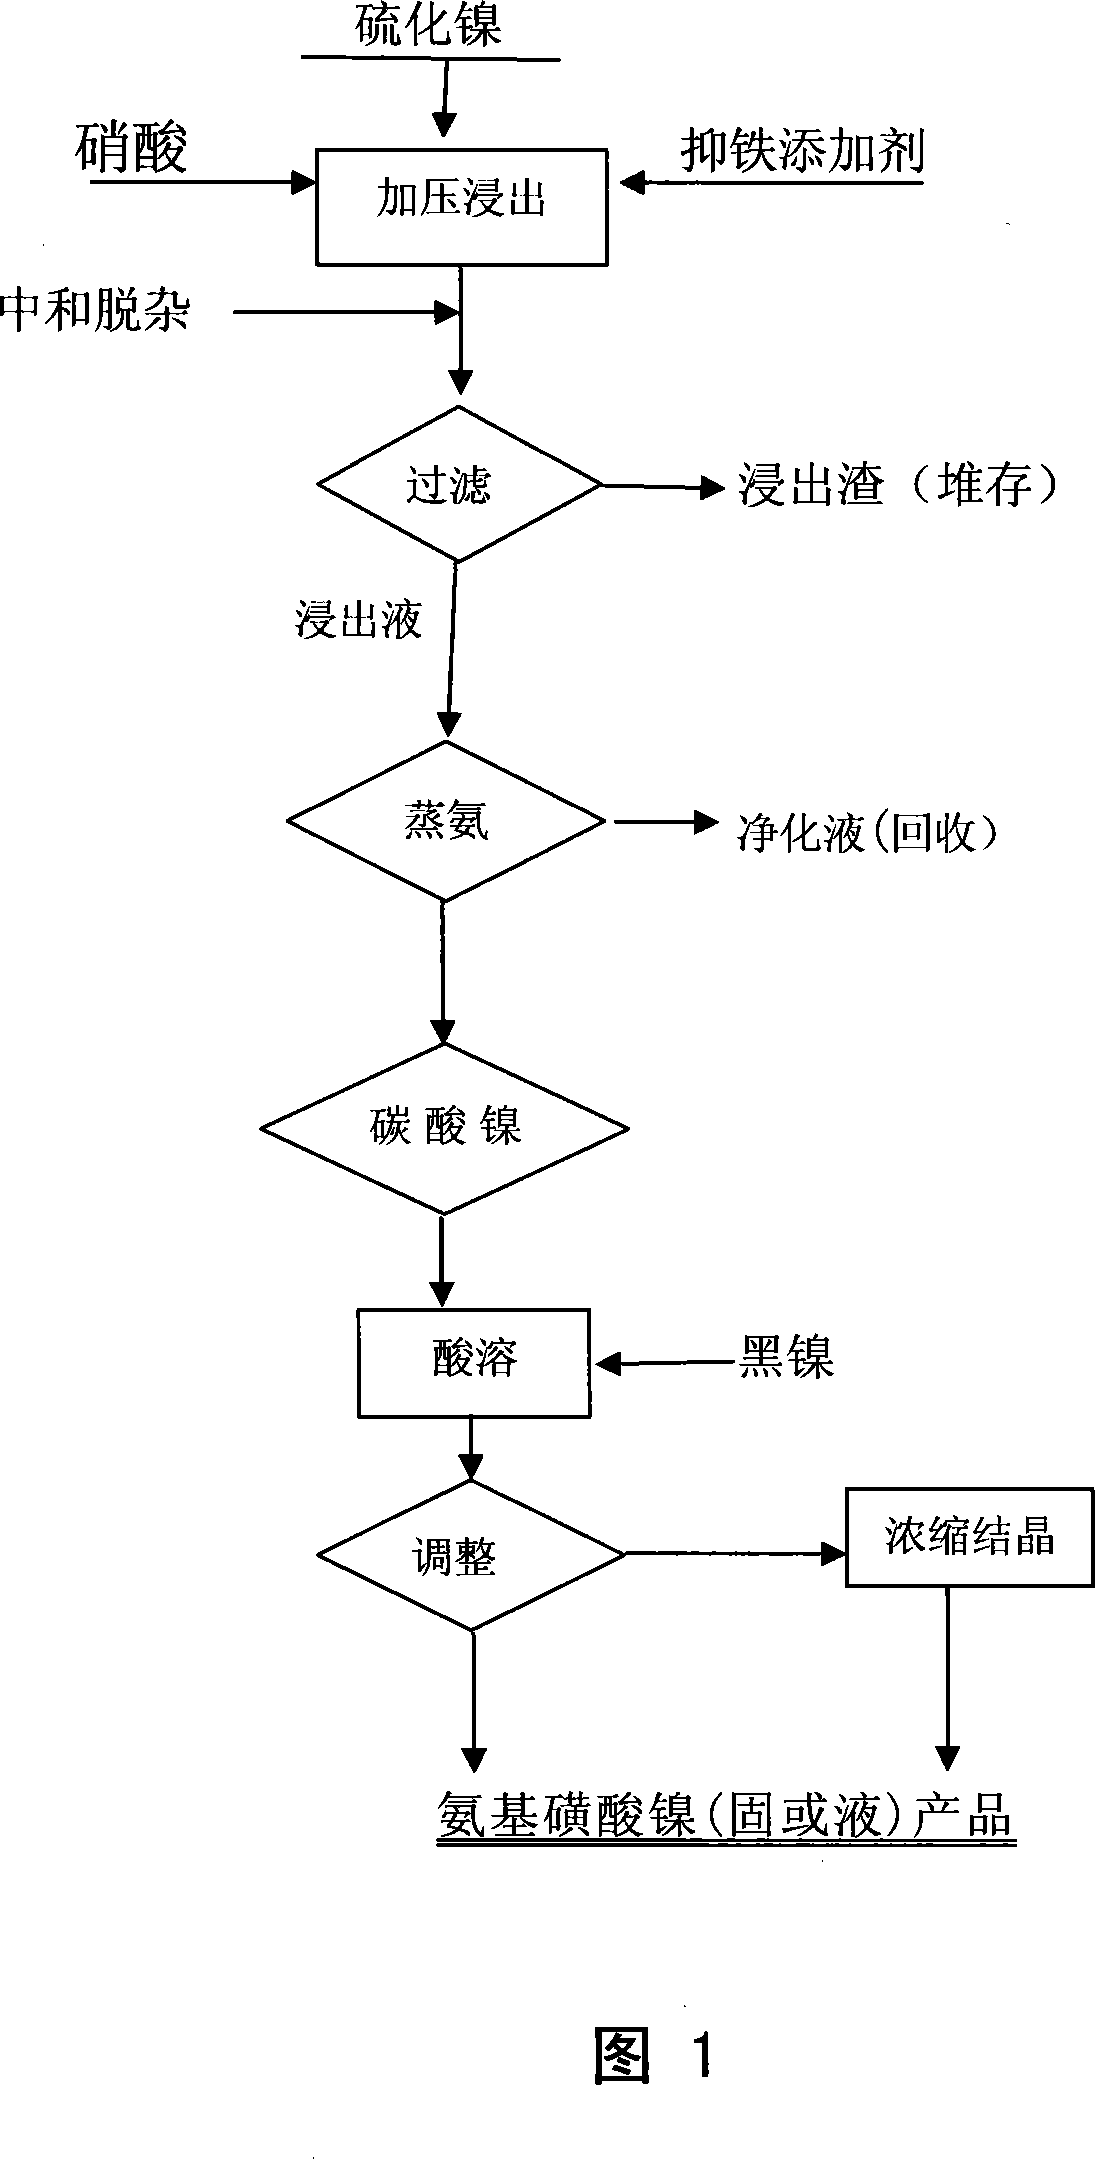 Process for preparing amino-sulfonic acid nickel by nickel sulfide concentrate